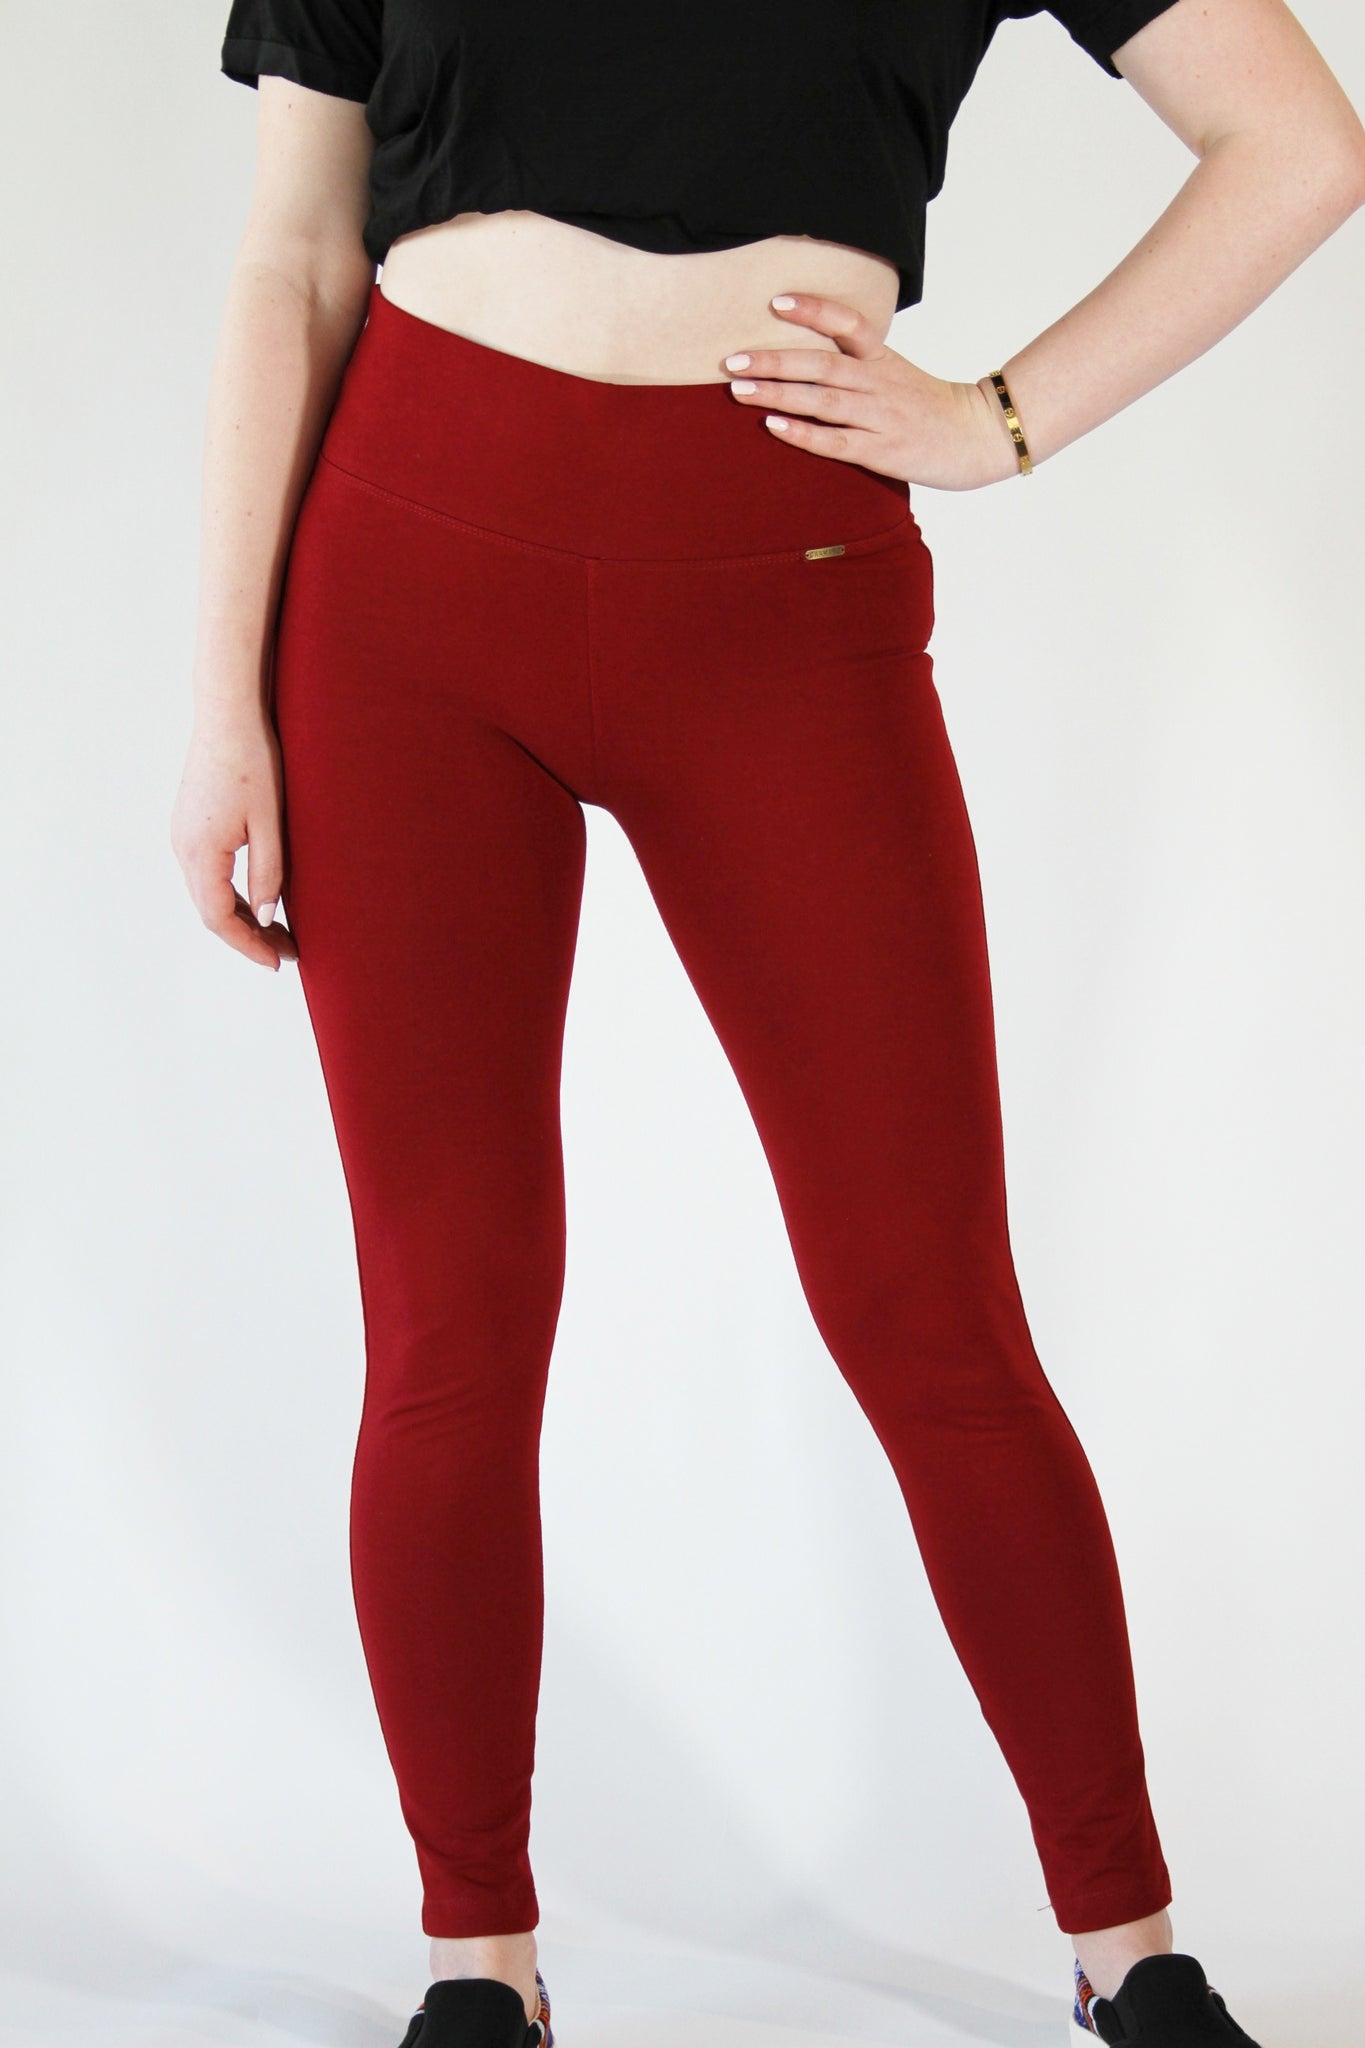 Scarlet High Waisted Cotton Stretch Legging